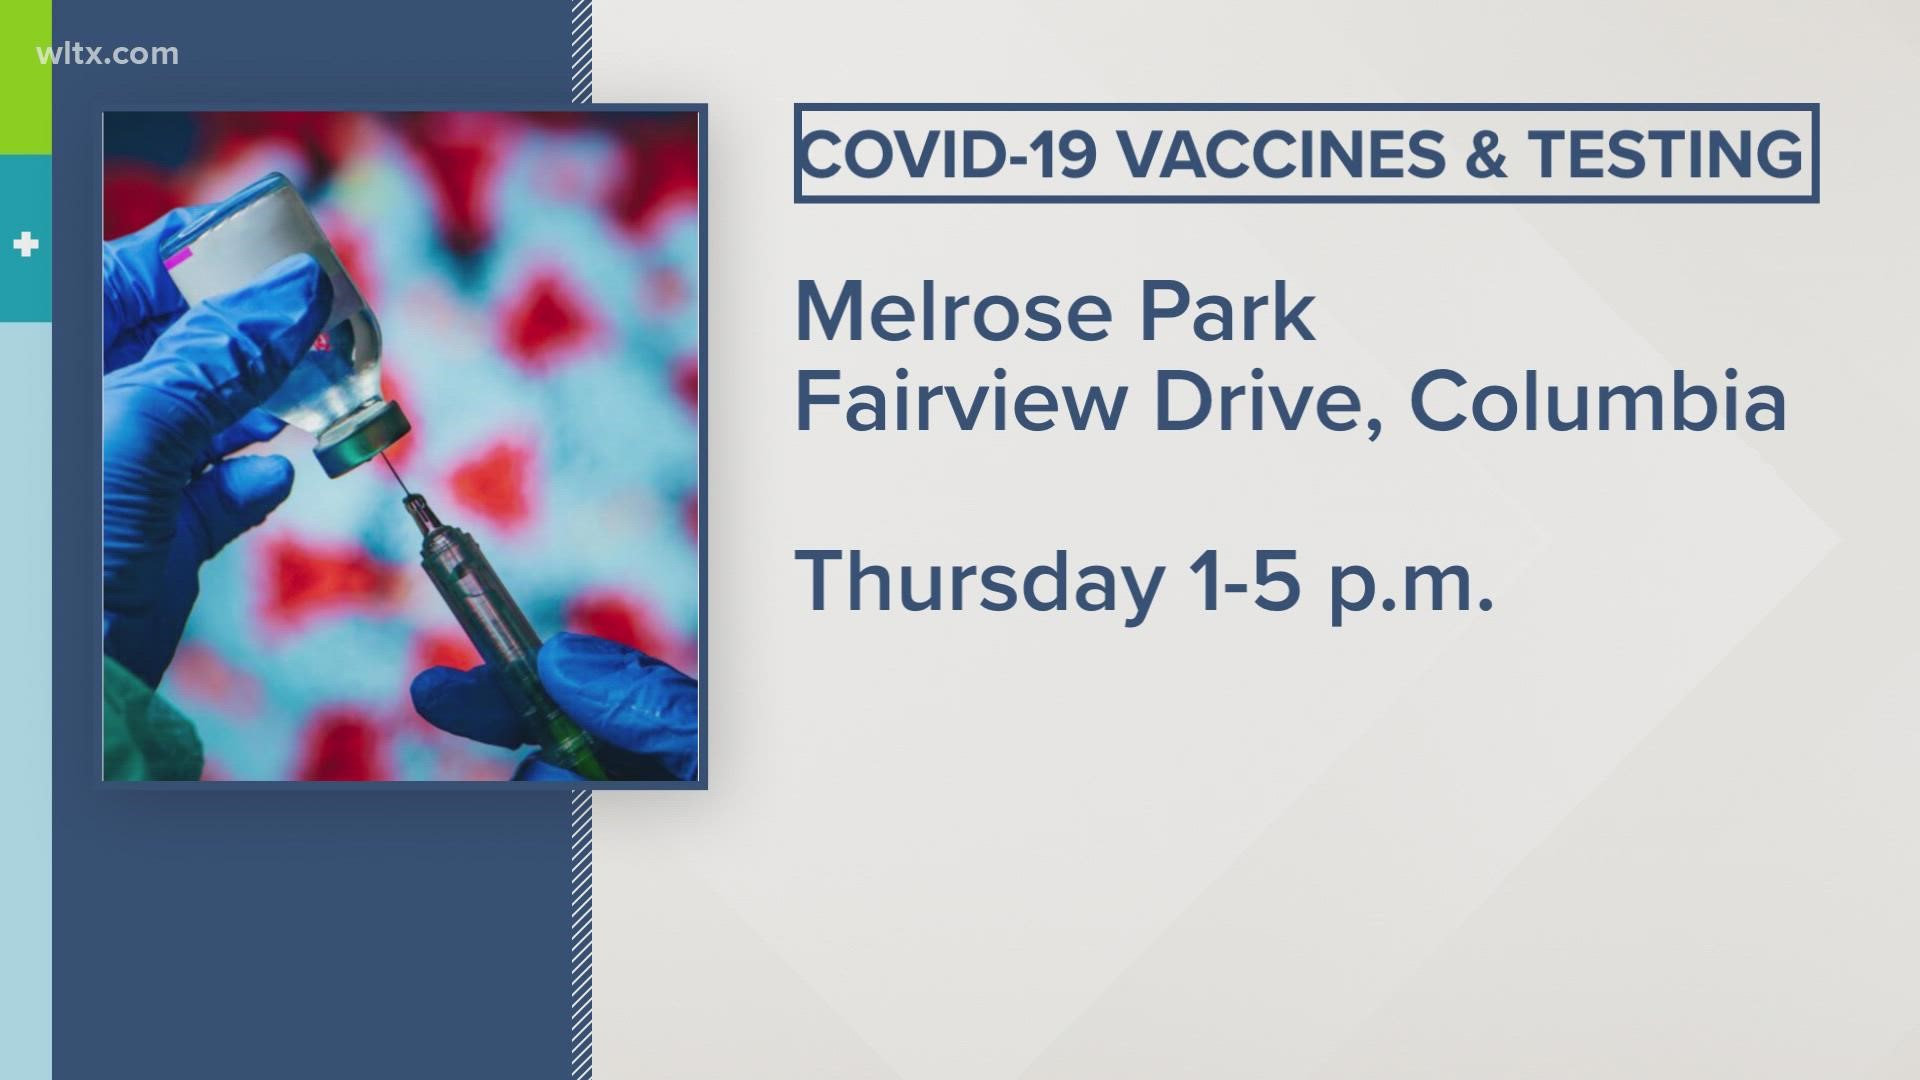 Every Tuesday and Thursday the city will offer testing and vaccinations each week free of charge.